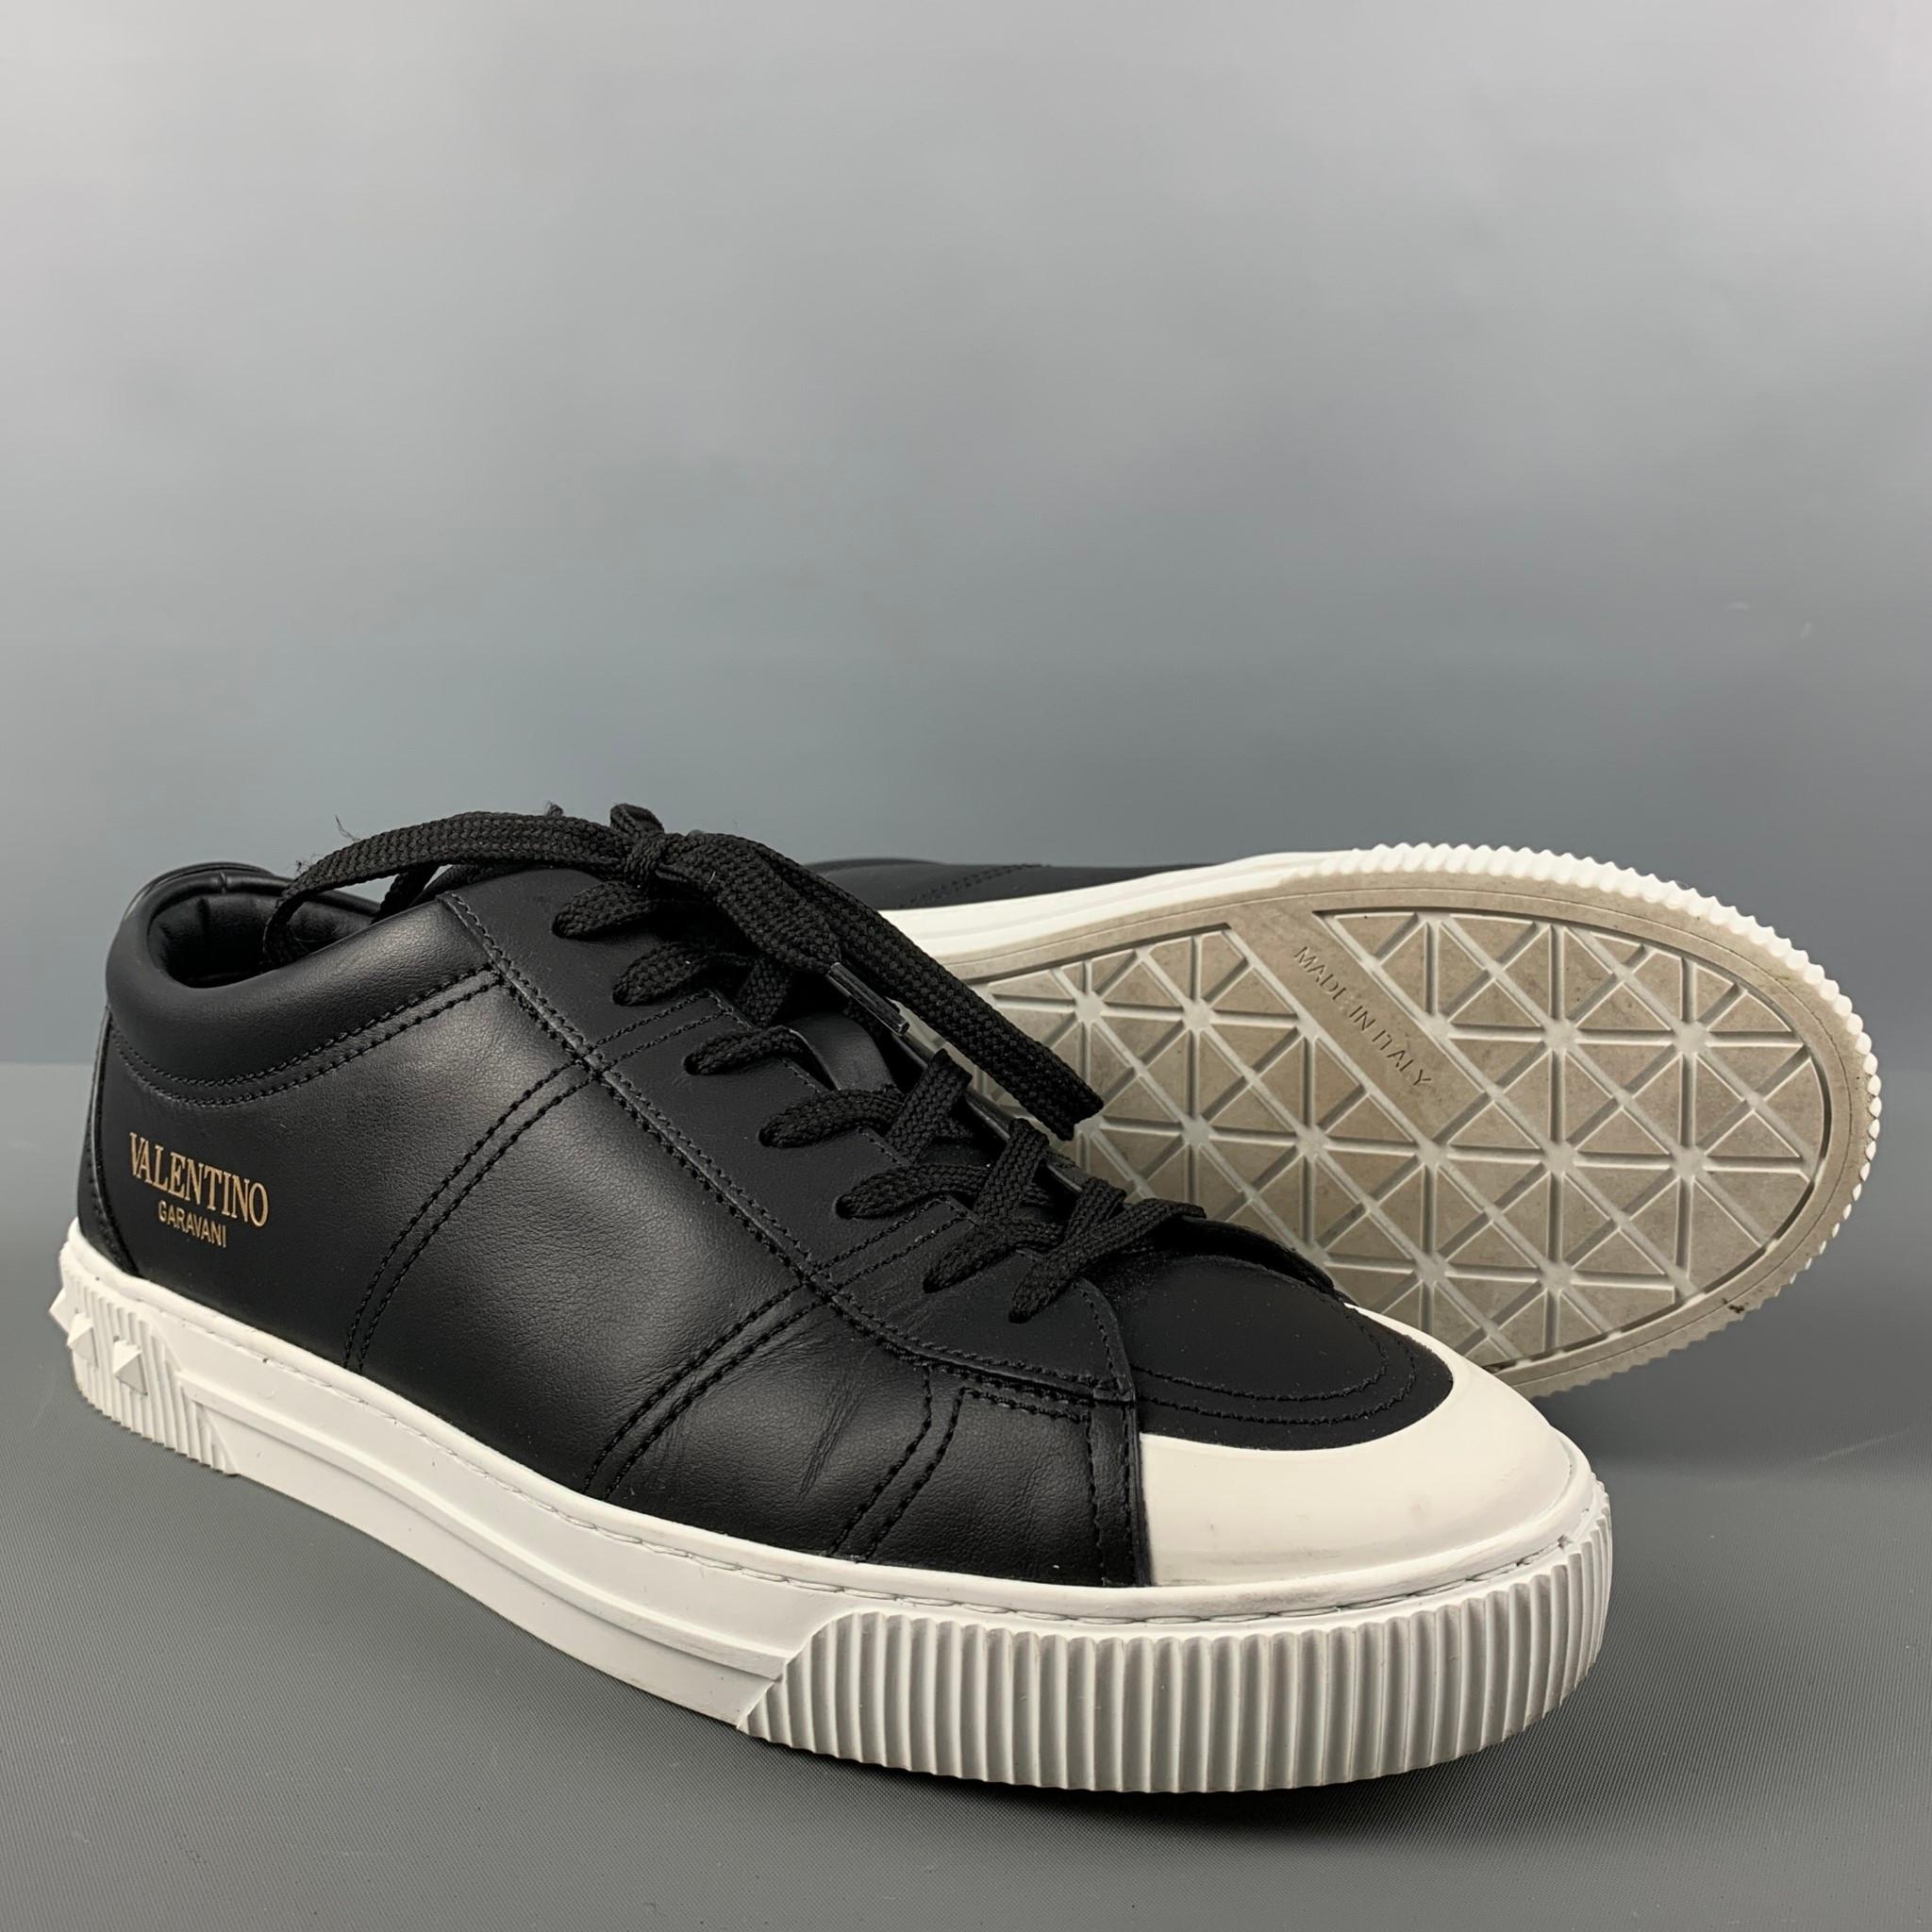 VALENTINO 'City Planet Rockstud' Size 8 Black Studded Leather Low Top Sneakers 2